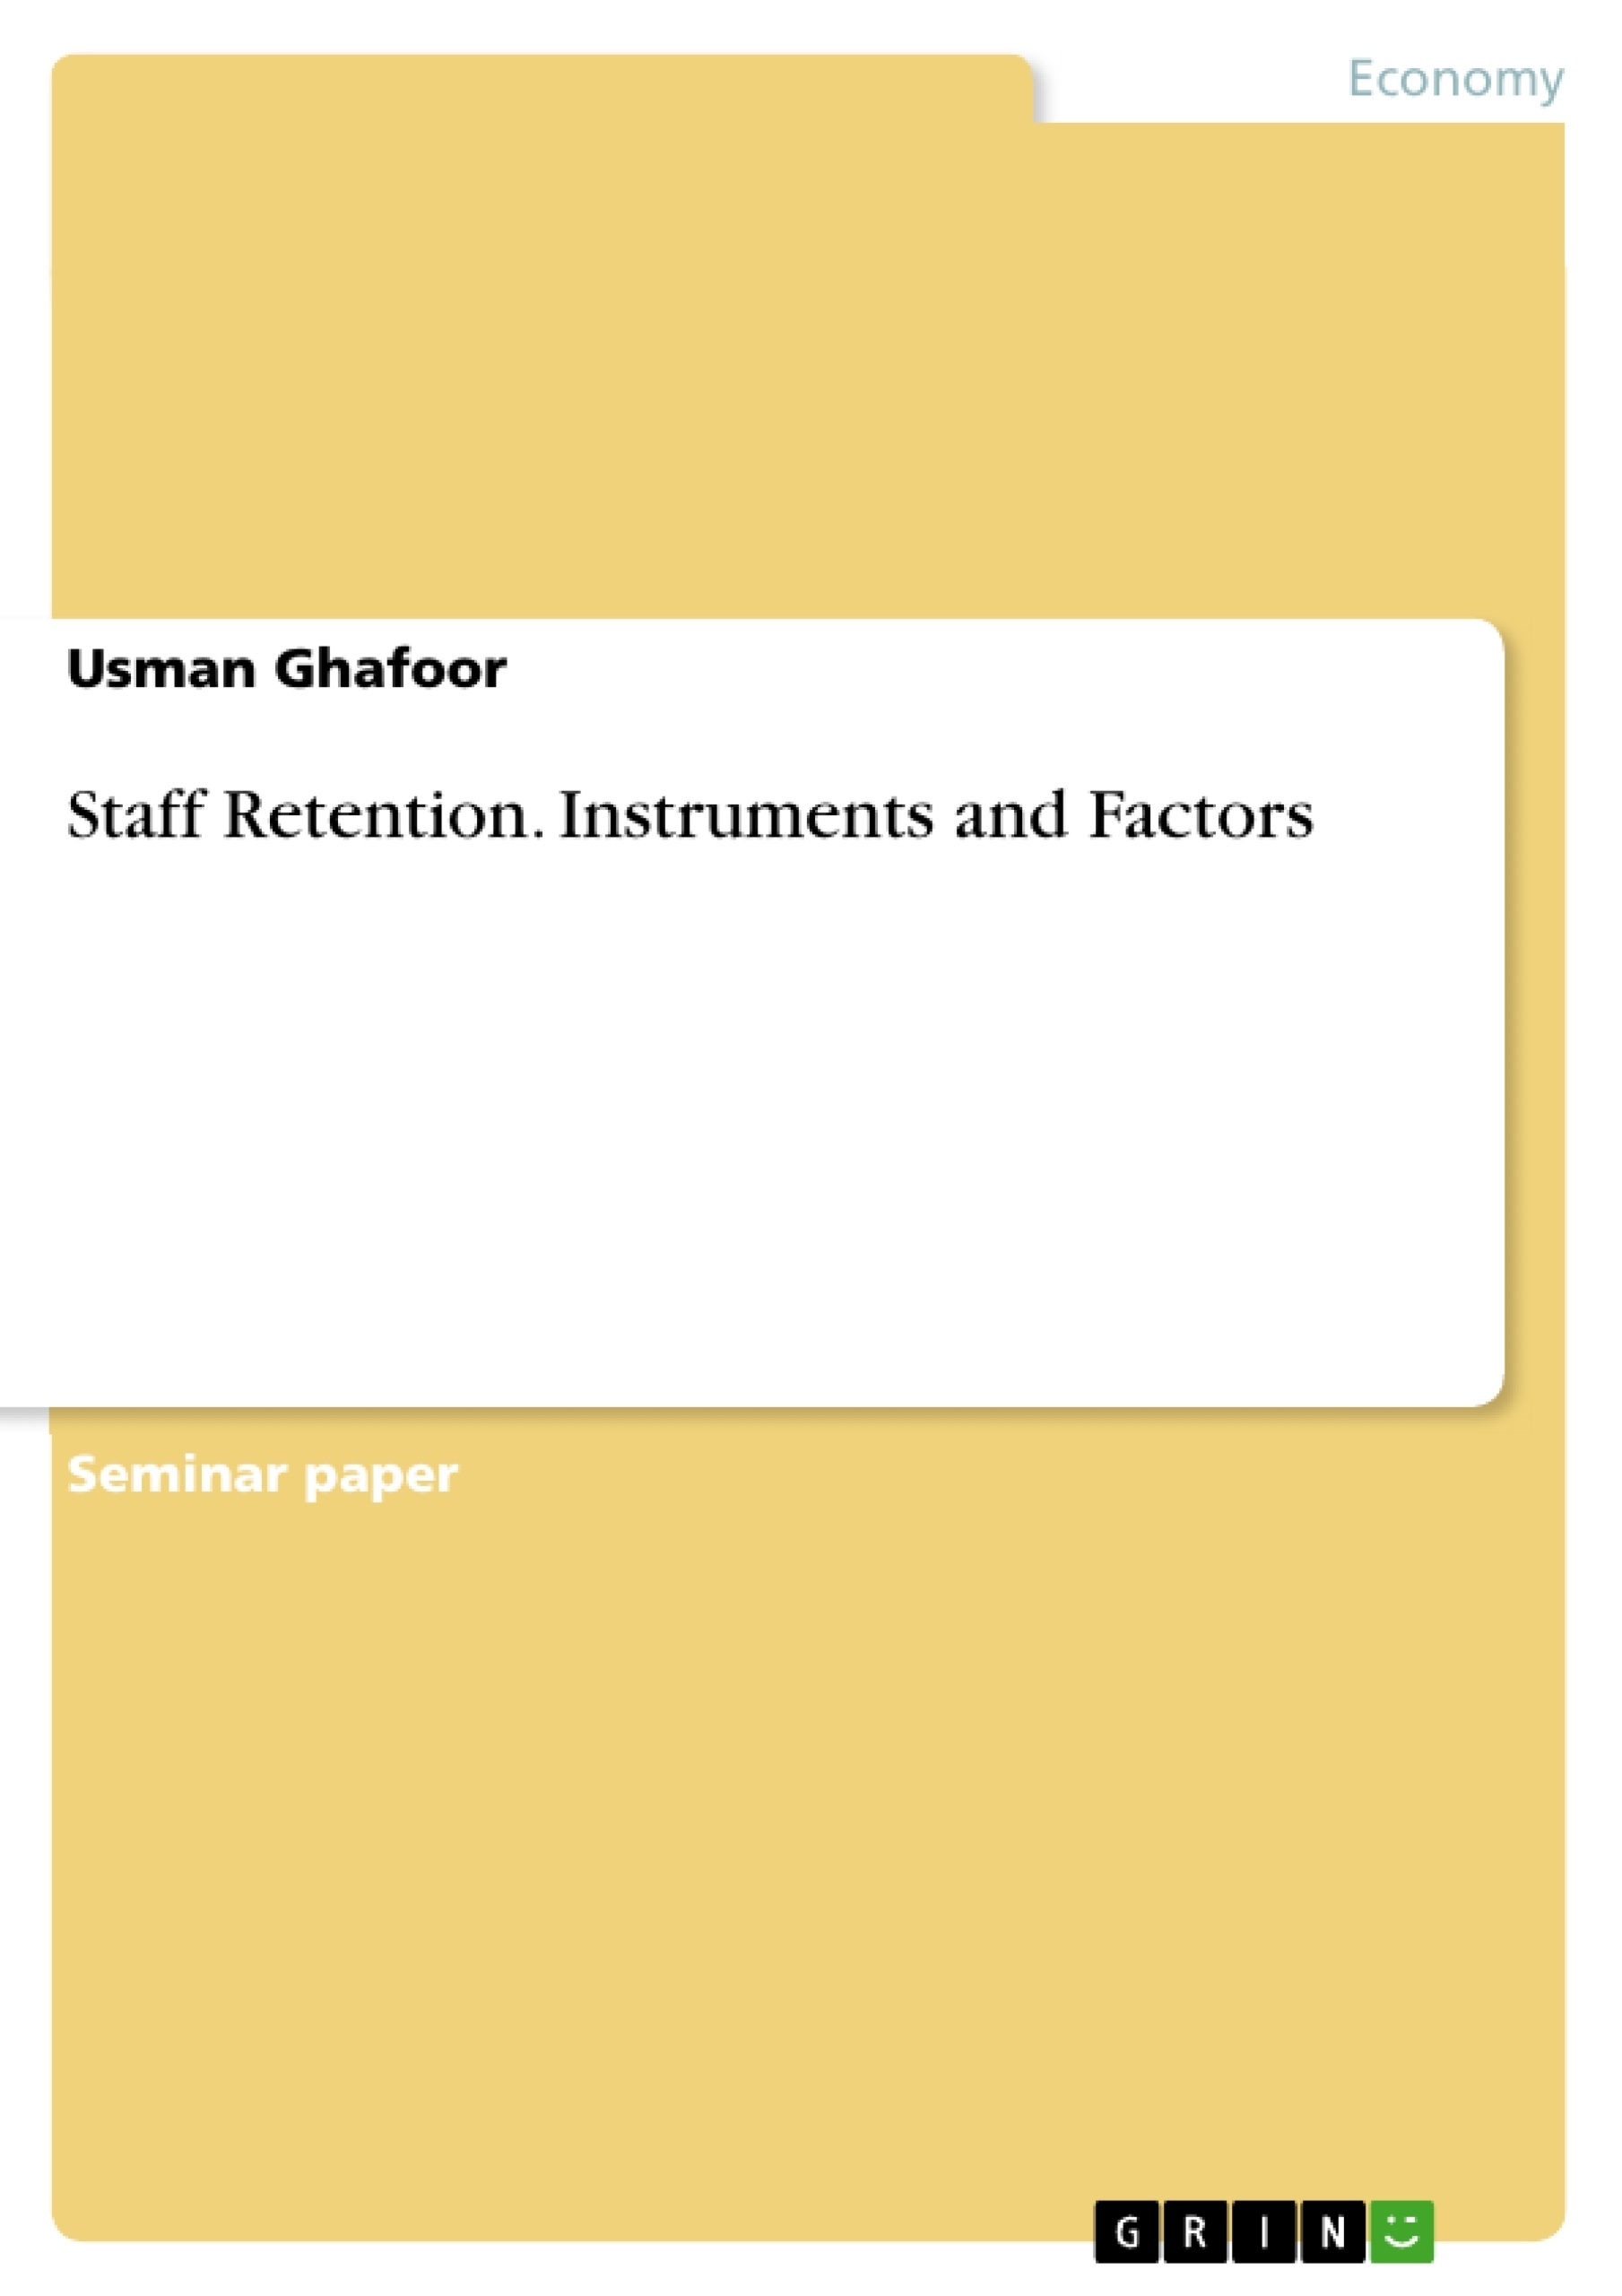 Title: Staff Retention. Instruments and Factors